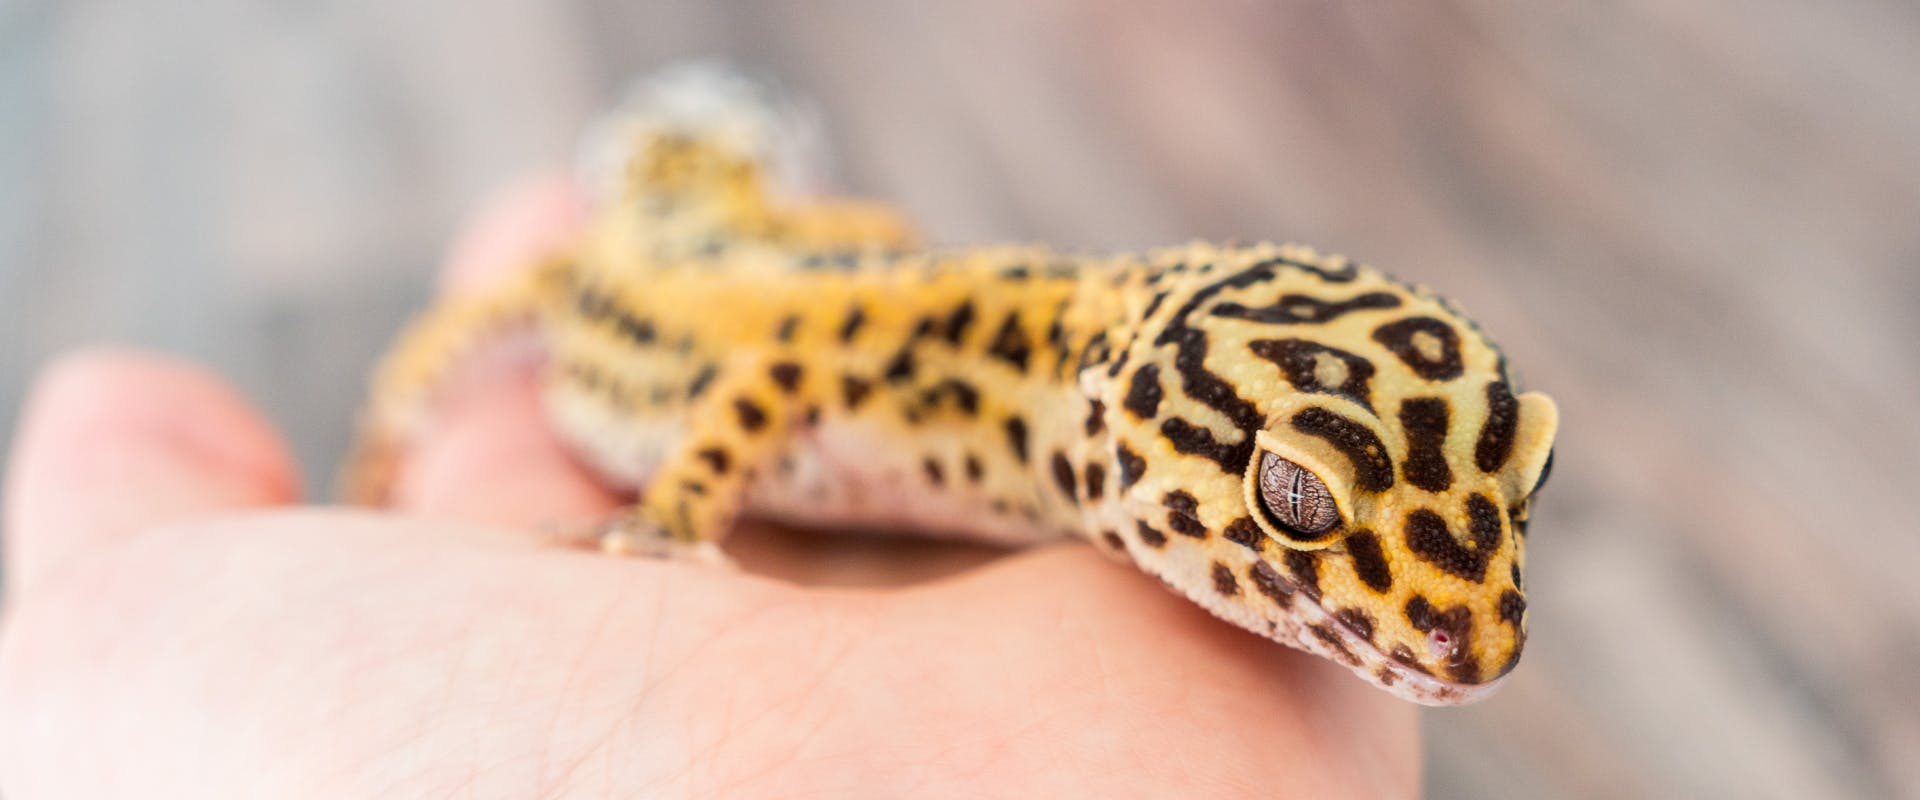 one of many pet leopard geckos sitting on a human's hand